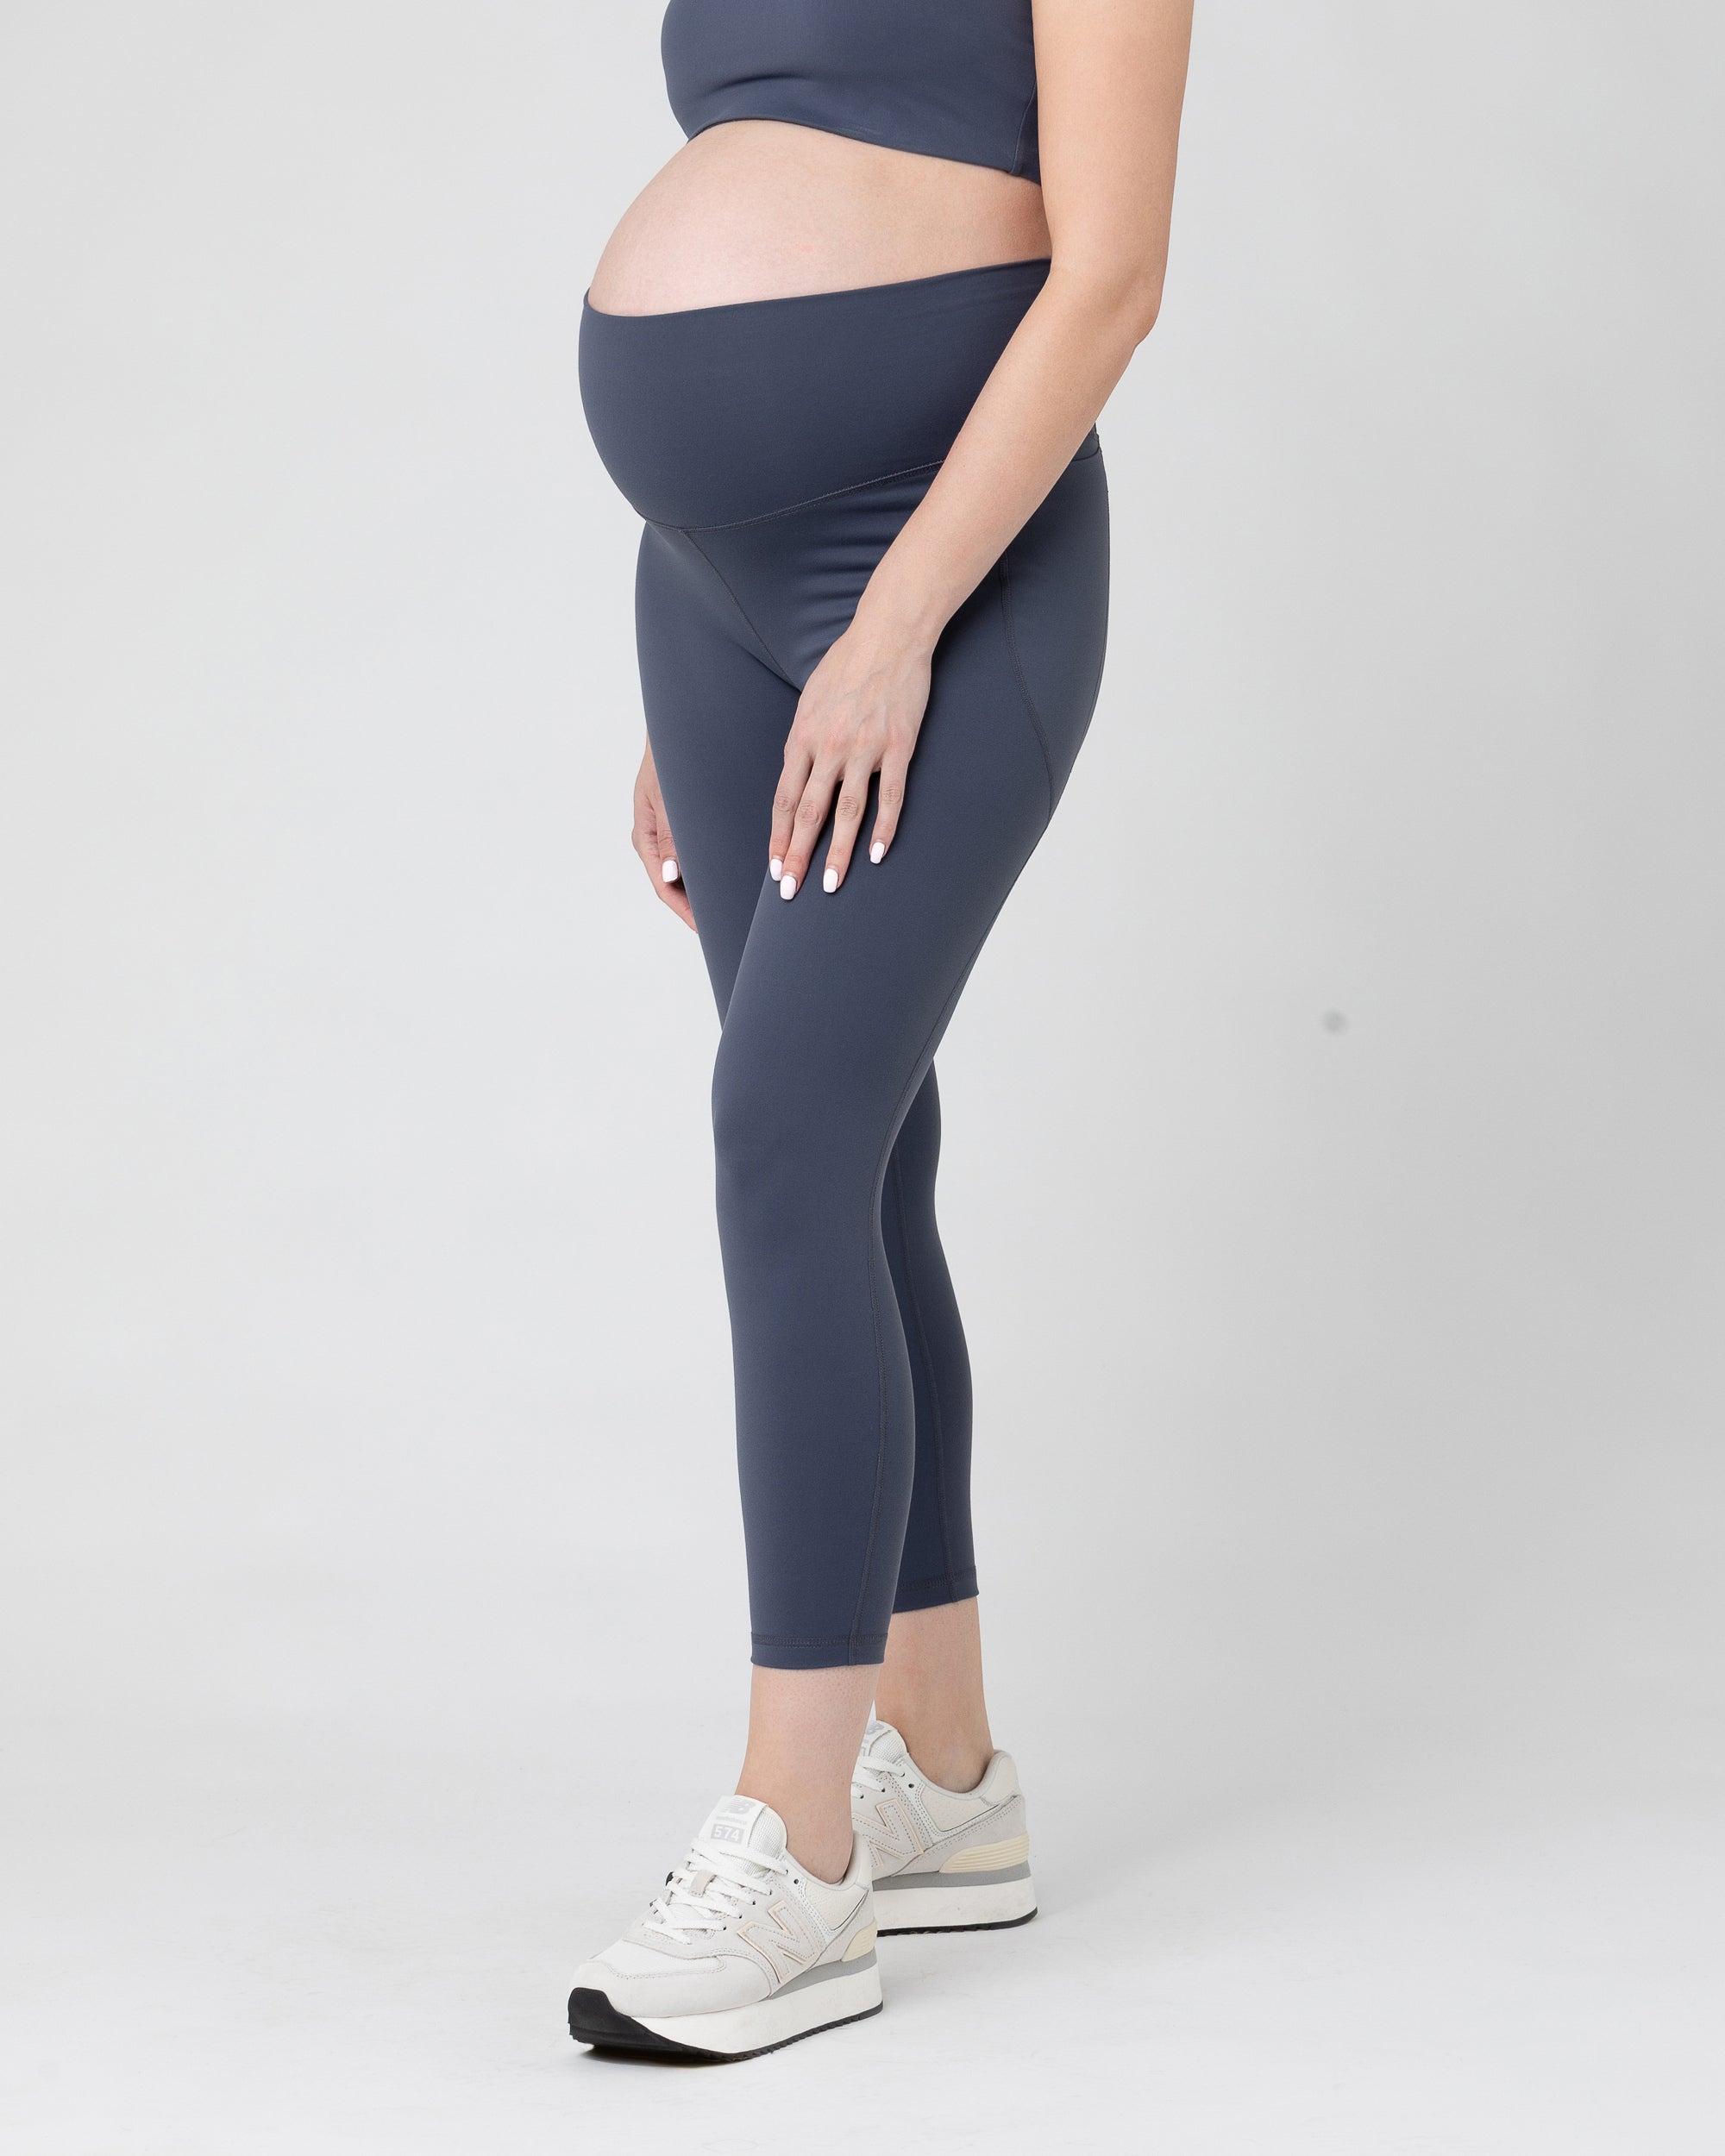 Supportive Maternity Activewear - SUGAR MAPLE notes